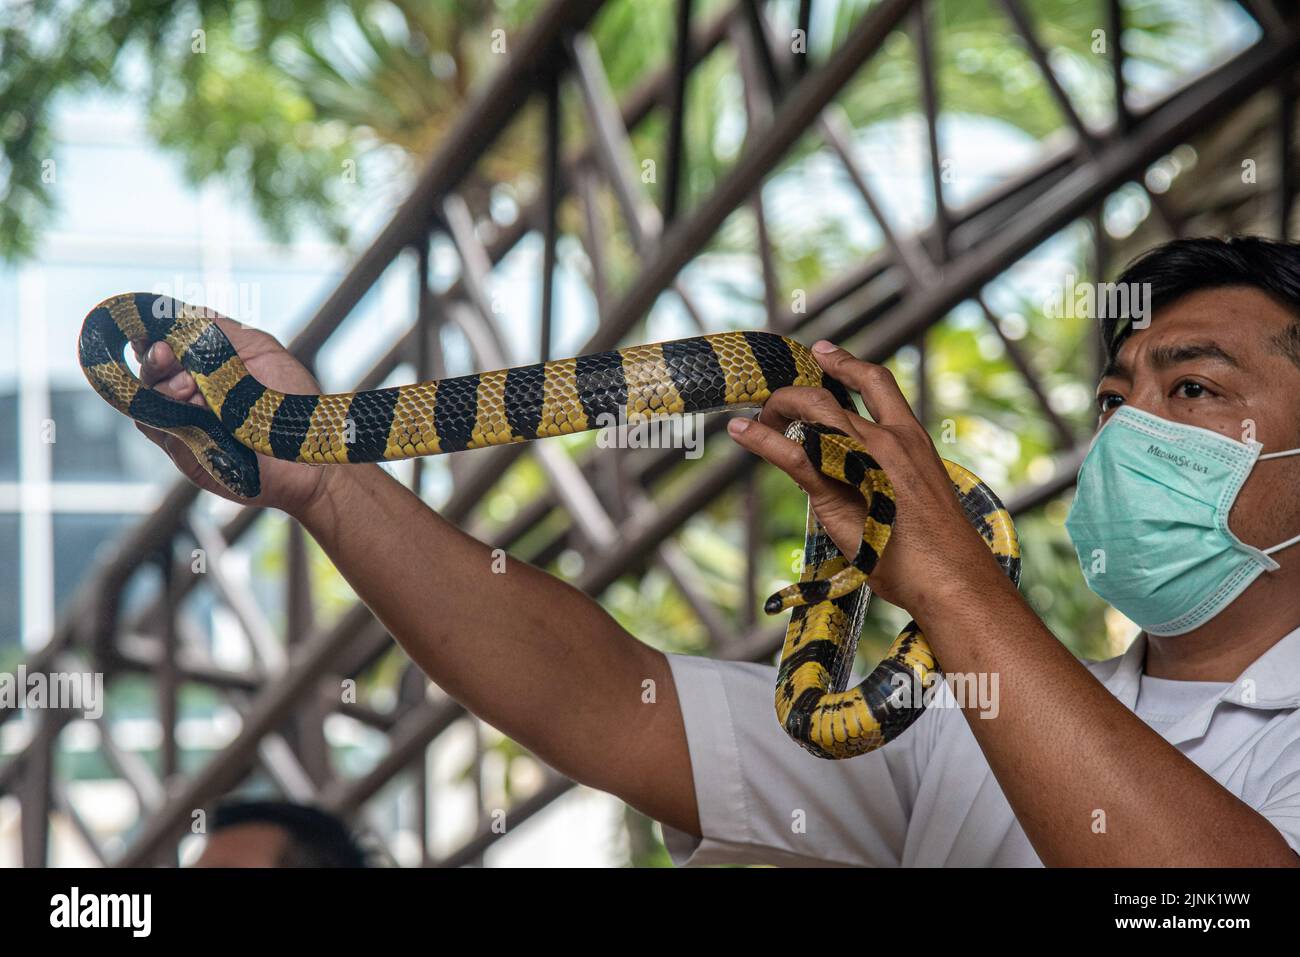 A Thai snake expert holds a Banded Krait Snake during a snake show at the Queen Saovabha Memorial Institute and Snake Farm in Bangkok. The Queen Saovabha Memorial Institute also known as the Bangkok Snake Farm was founded on 1923 to raised venomous snakes for venom extraction and production of antivenom for Thailand and surrounding regions where venomous snakes are endemic. The institute also serves as a museum to inform the general public about snakes in Thailand. (Photo by Peerapon Boonyakiat / SOPA Images/Sipa USA) Stock Photo